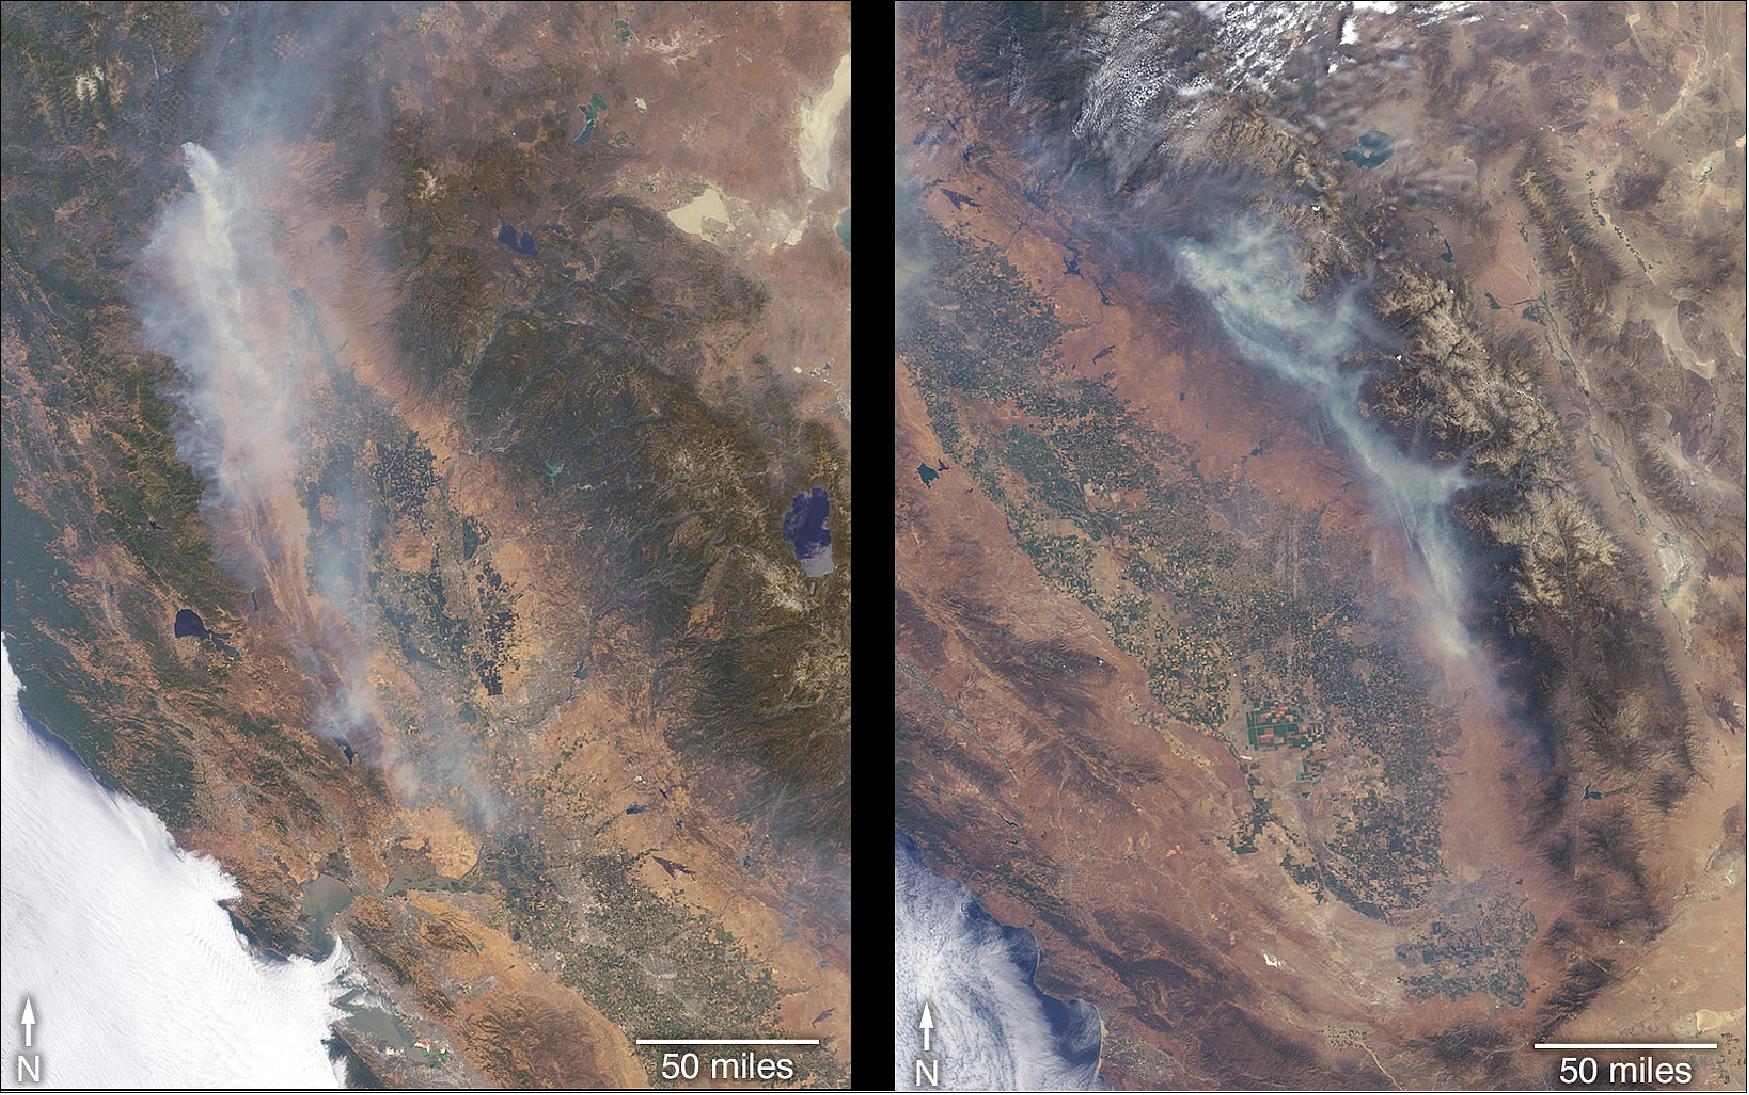 Figure 15: The MISR (Multi-angle Imaging SpectroRadiometer) instrument on NASA's Terra satellite took these images of the Carr Fire (left) and the Ferguson Fire (right) on July 27 and July 29, respectively (image credit: NASA)